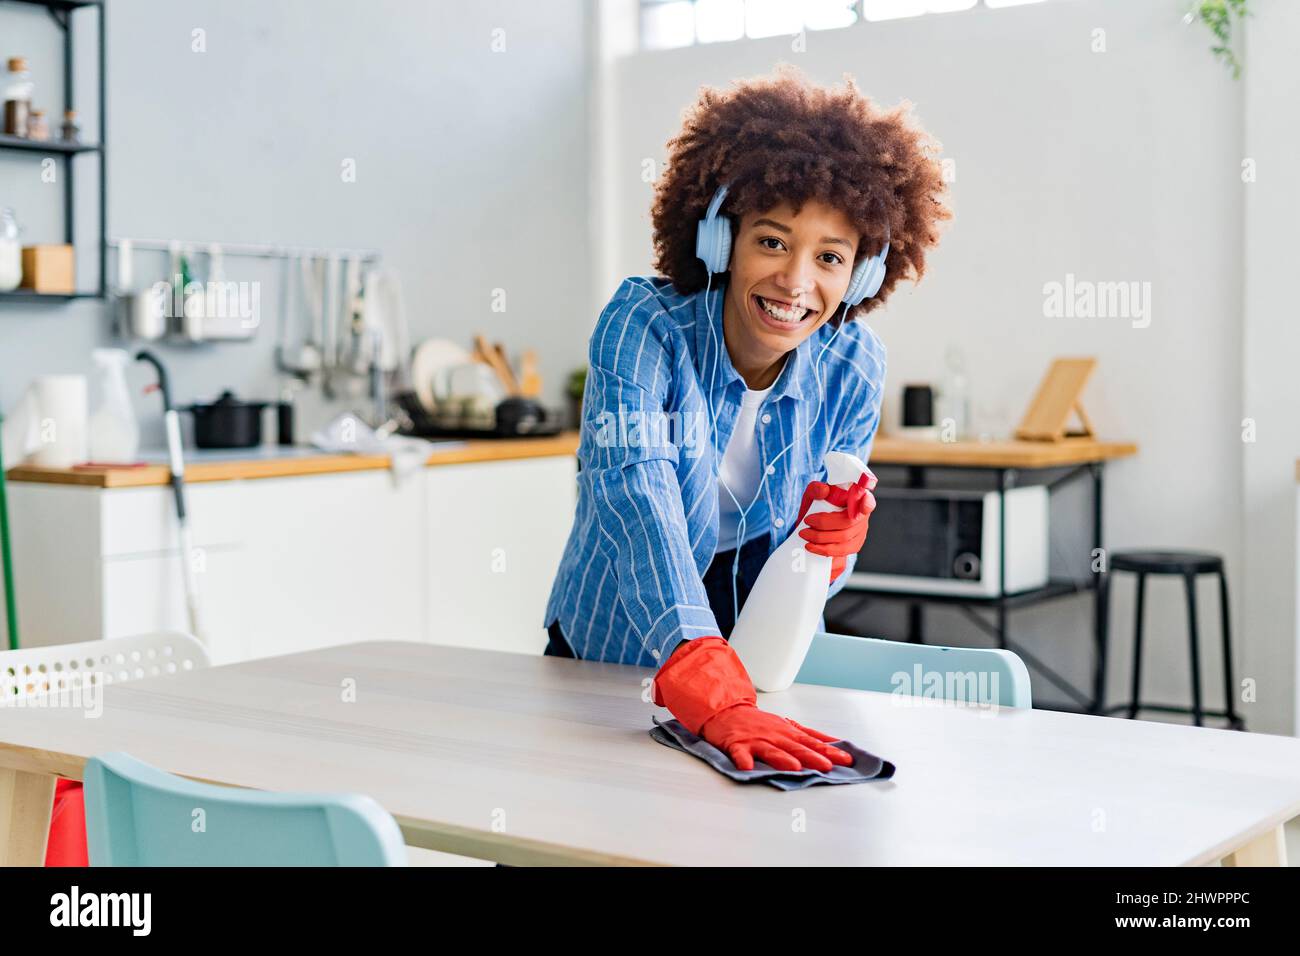 https://c8.alamy.com/comp/2HWPPPC/smiling-afro-woman-listening-music-cleaning-dining-table-in-kitchen-2HWPPPC.jpg